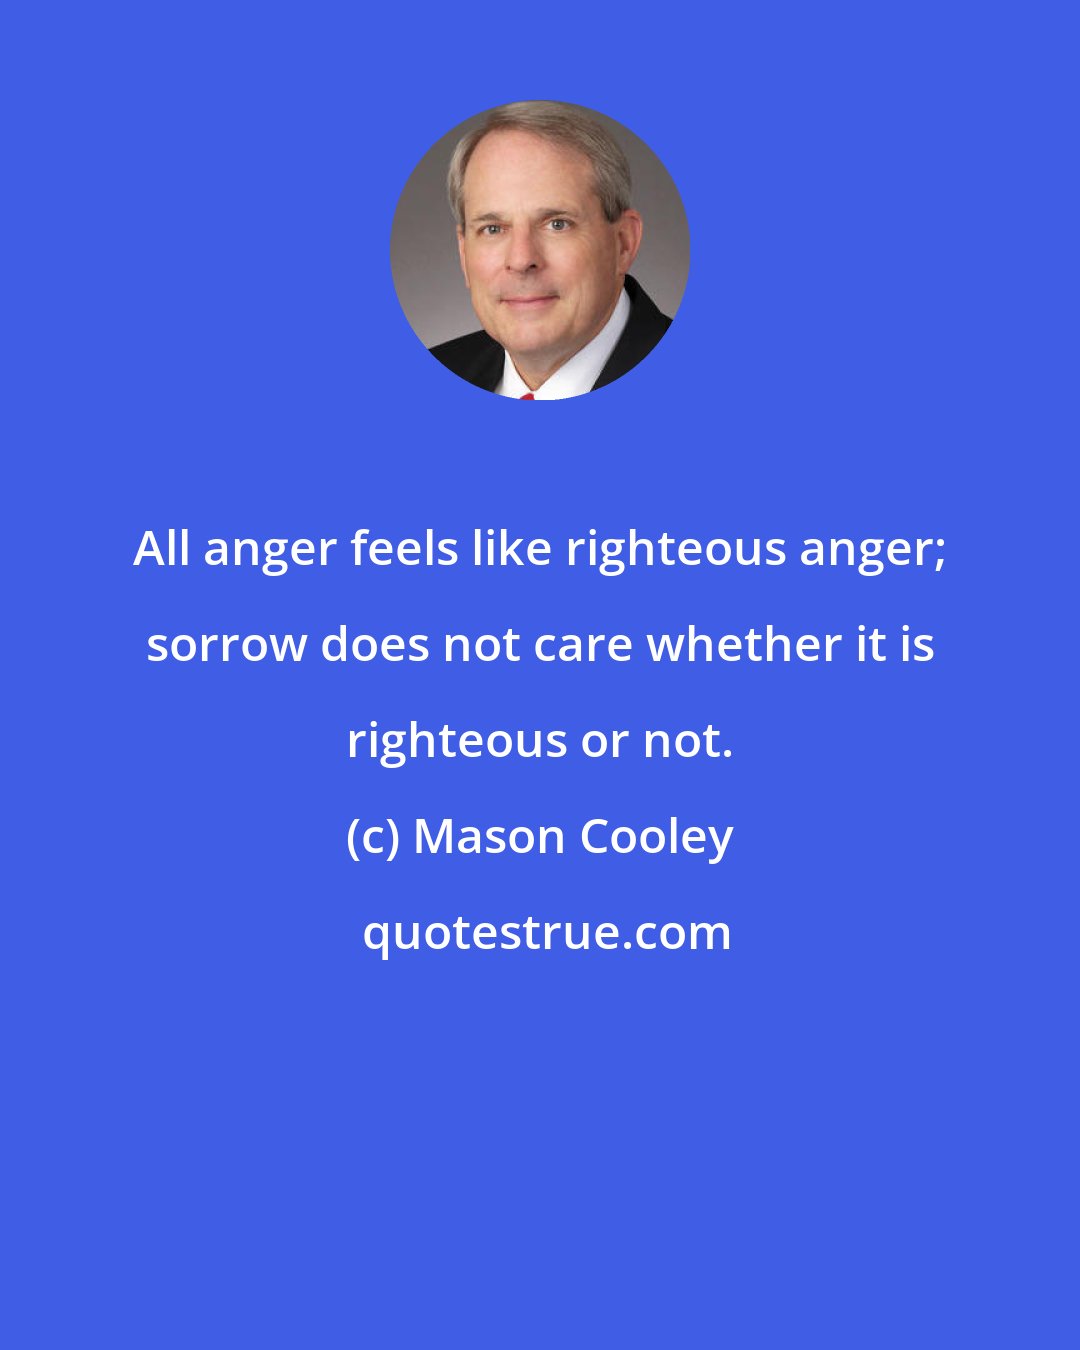 Mason Cooley: All anger feels like righteous anger; sorrow does not care whether it is righteous or not.